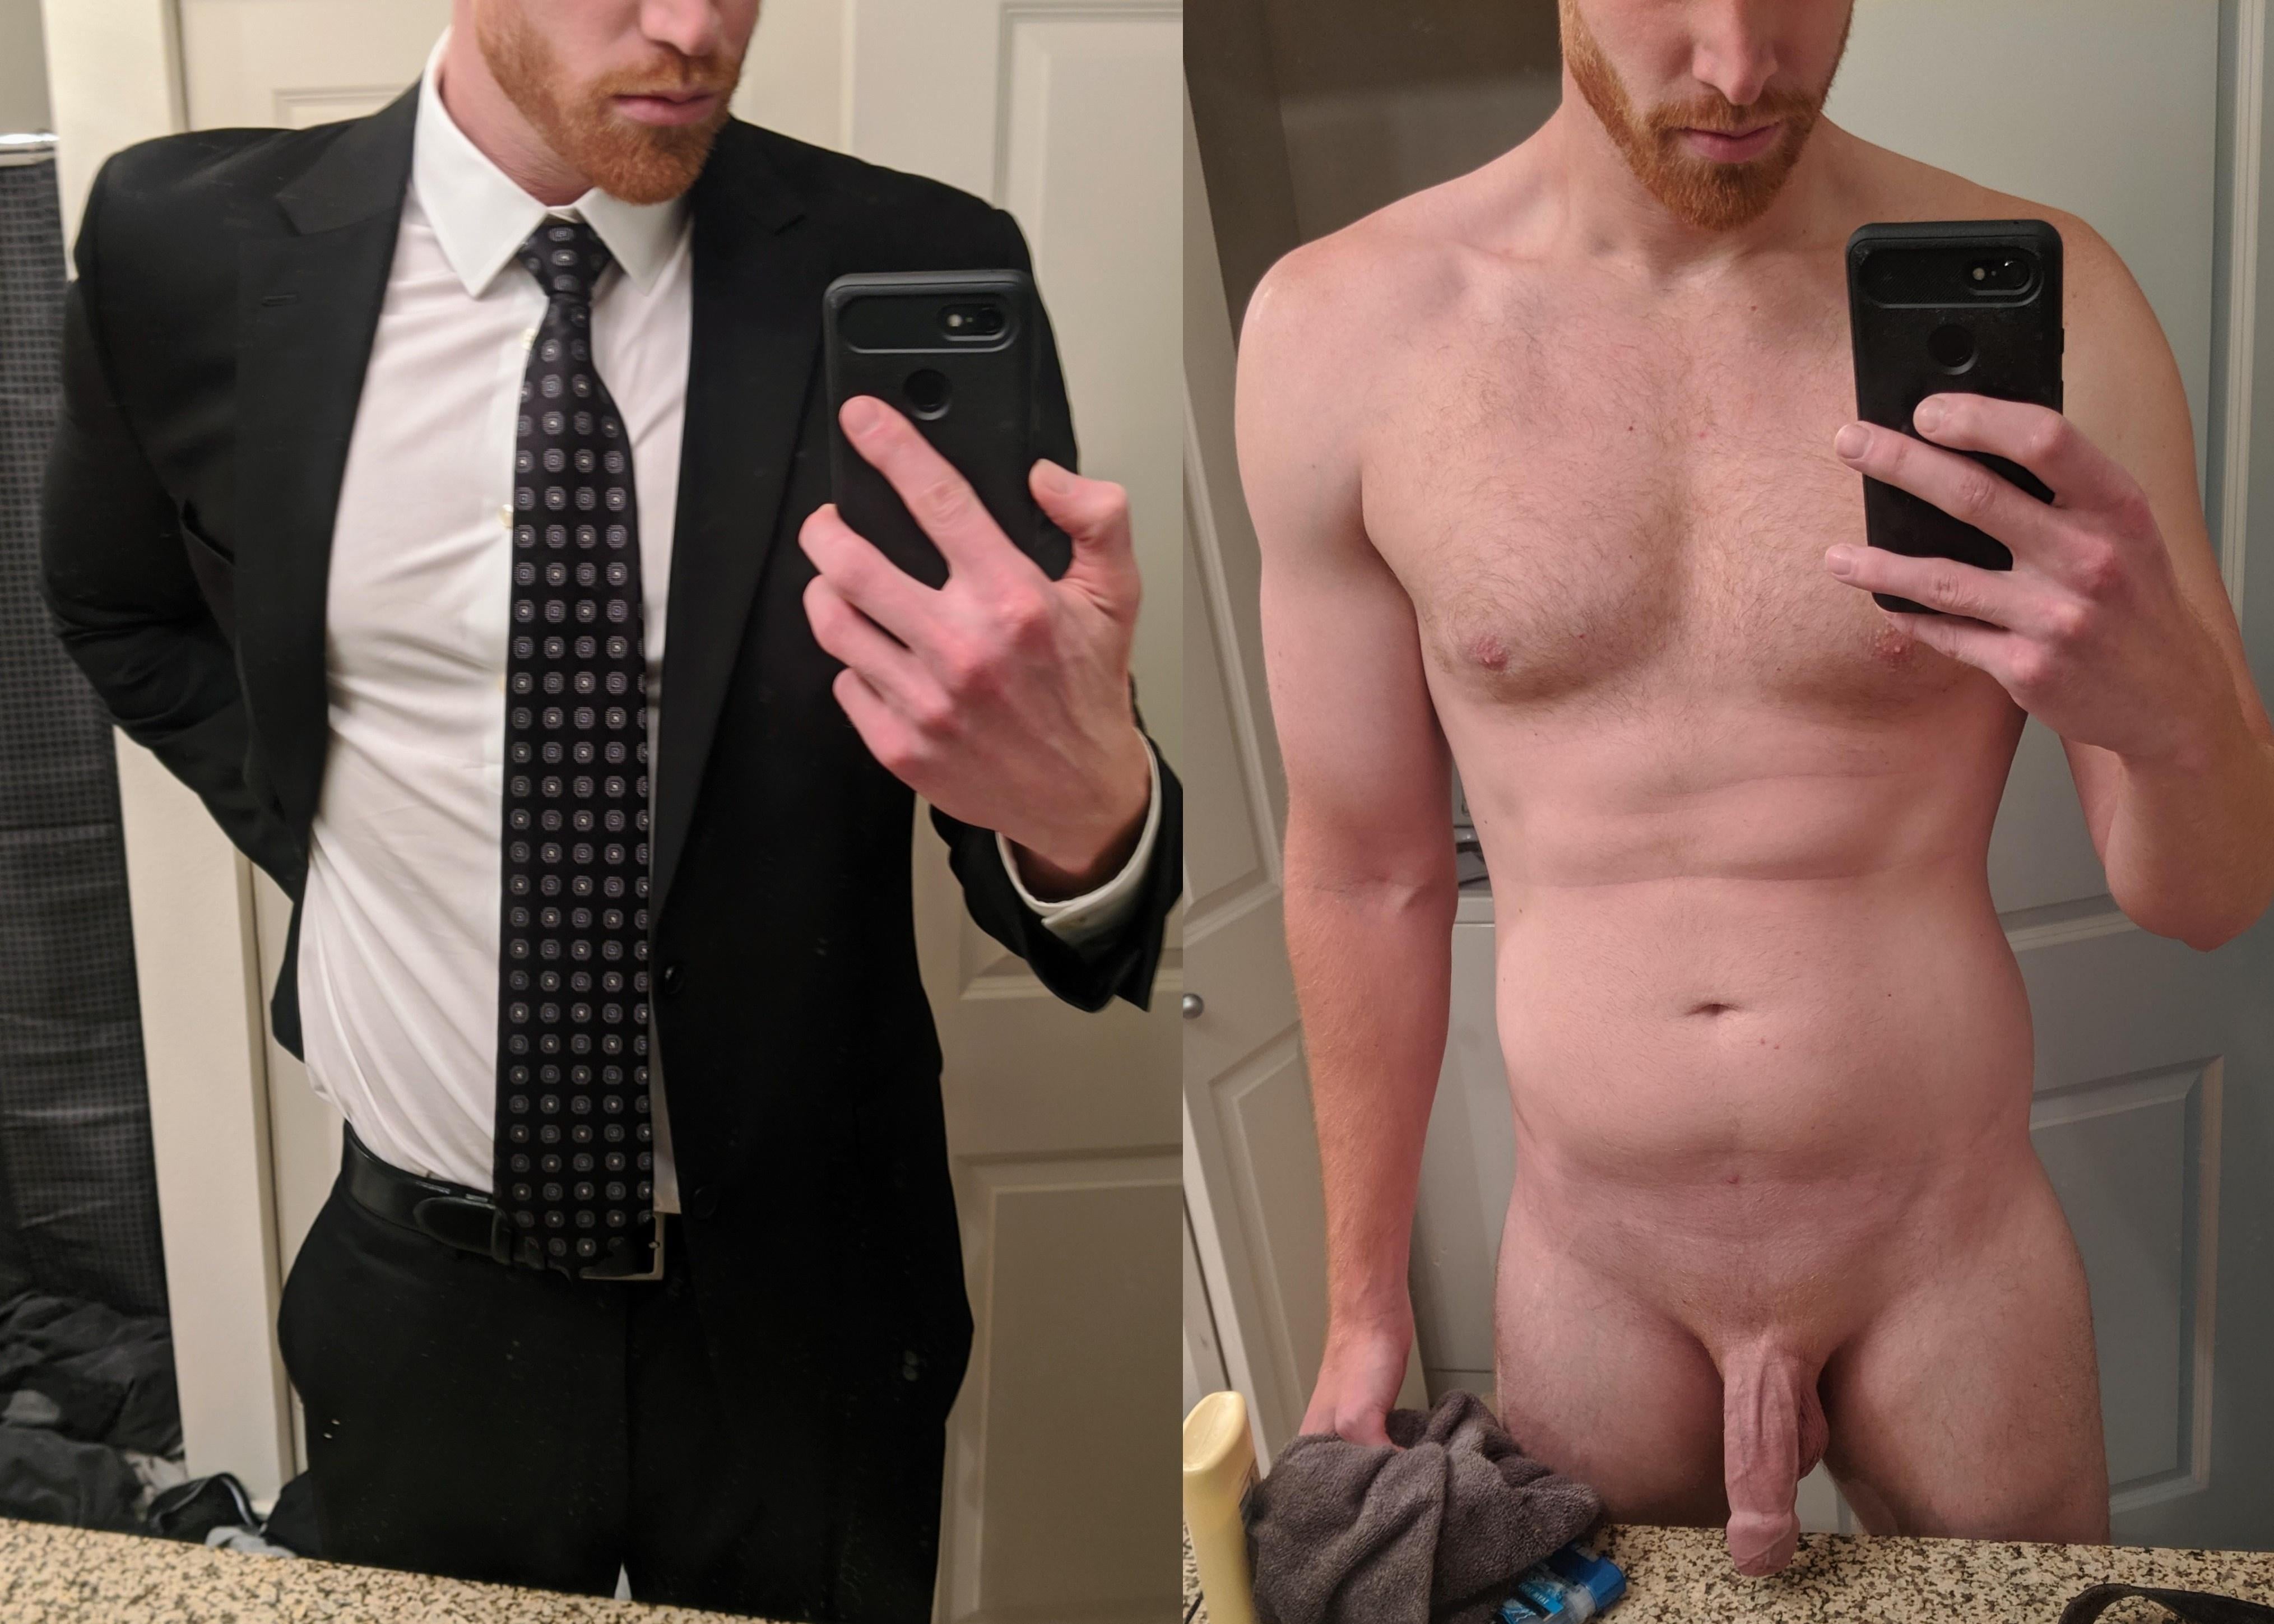 Do you prefer this 69 daddy dressed up or dressed